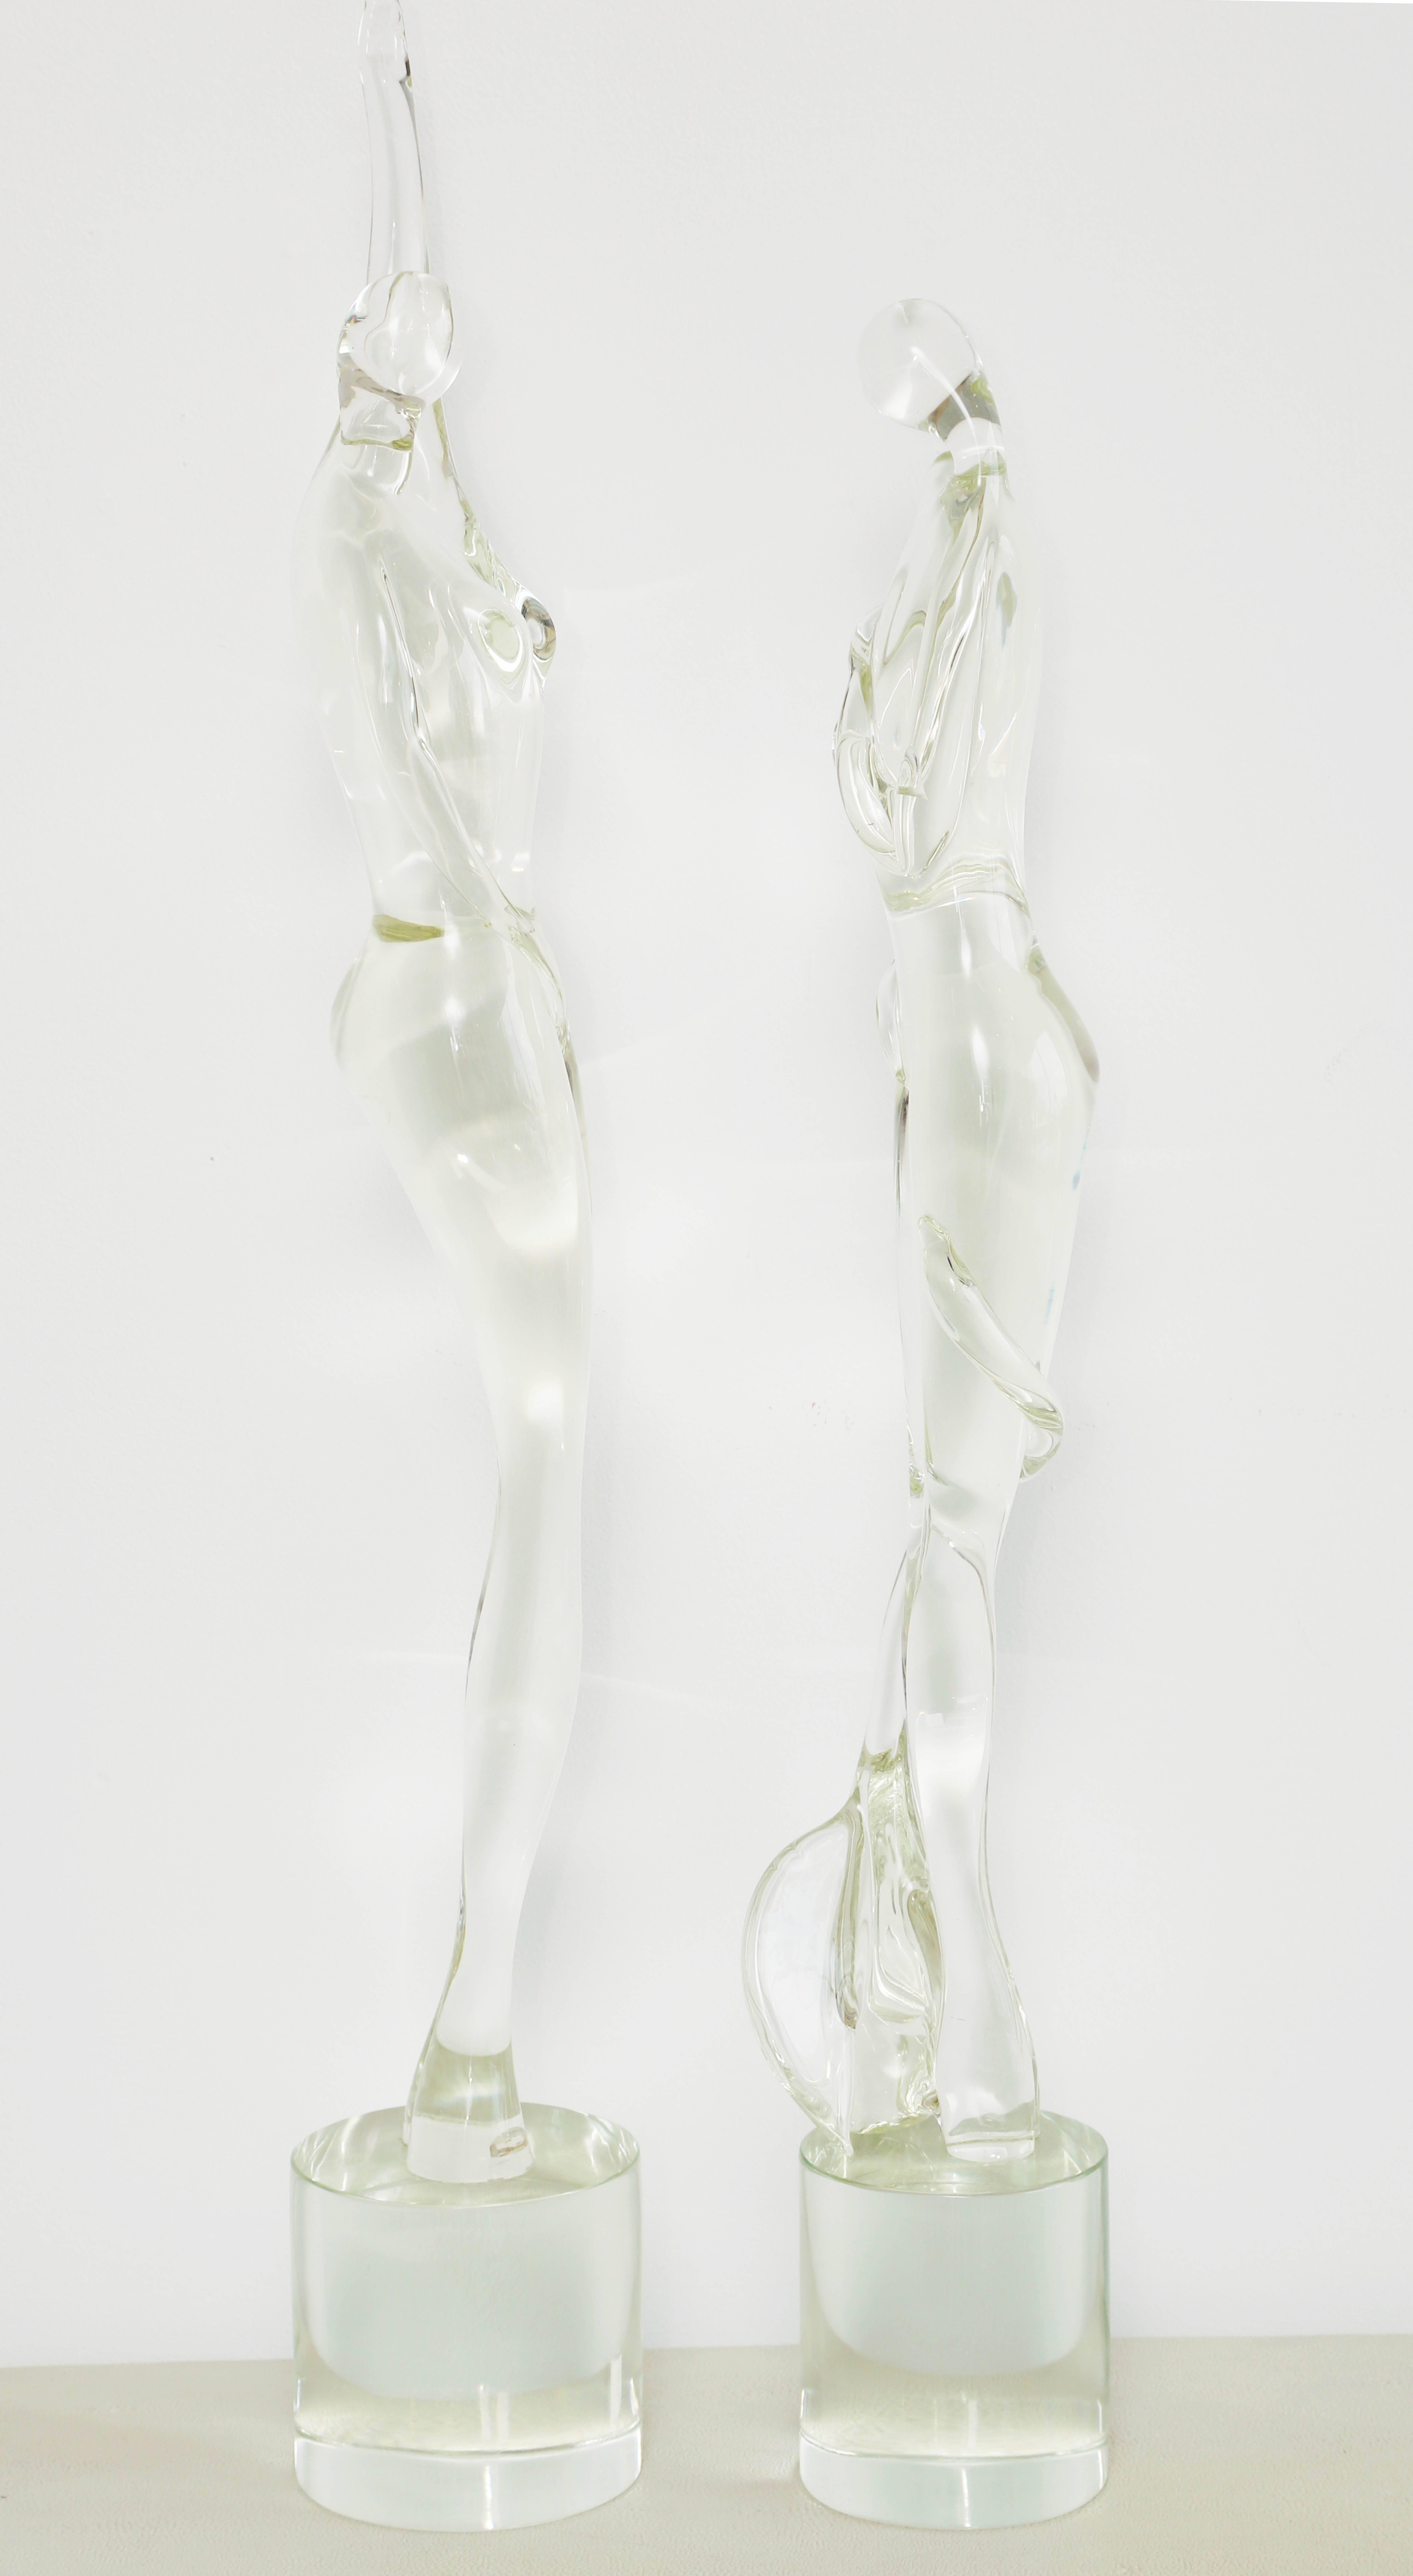 Pair of clear Murano glass figures made in Italy 1960s. The figures are both female. Unsigned
Measures: 35" H x 5" D
30.5" H x 4.5" D.